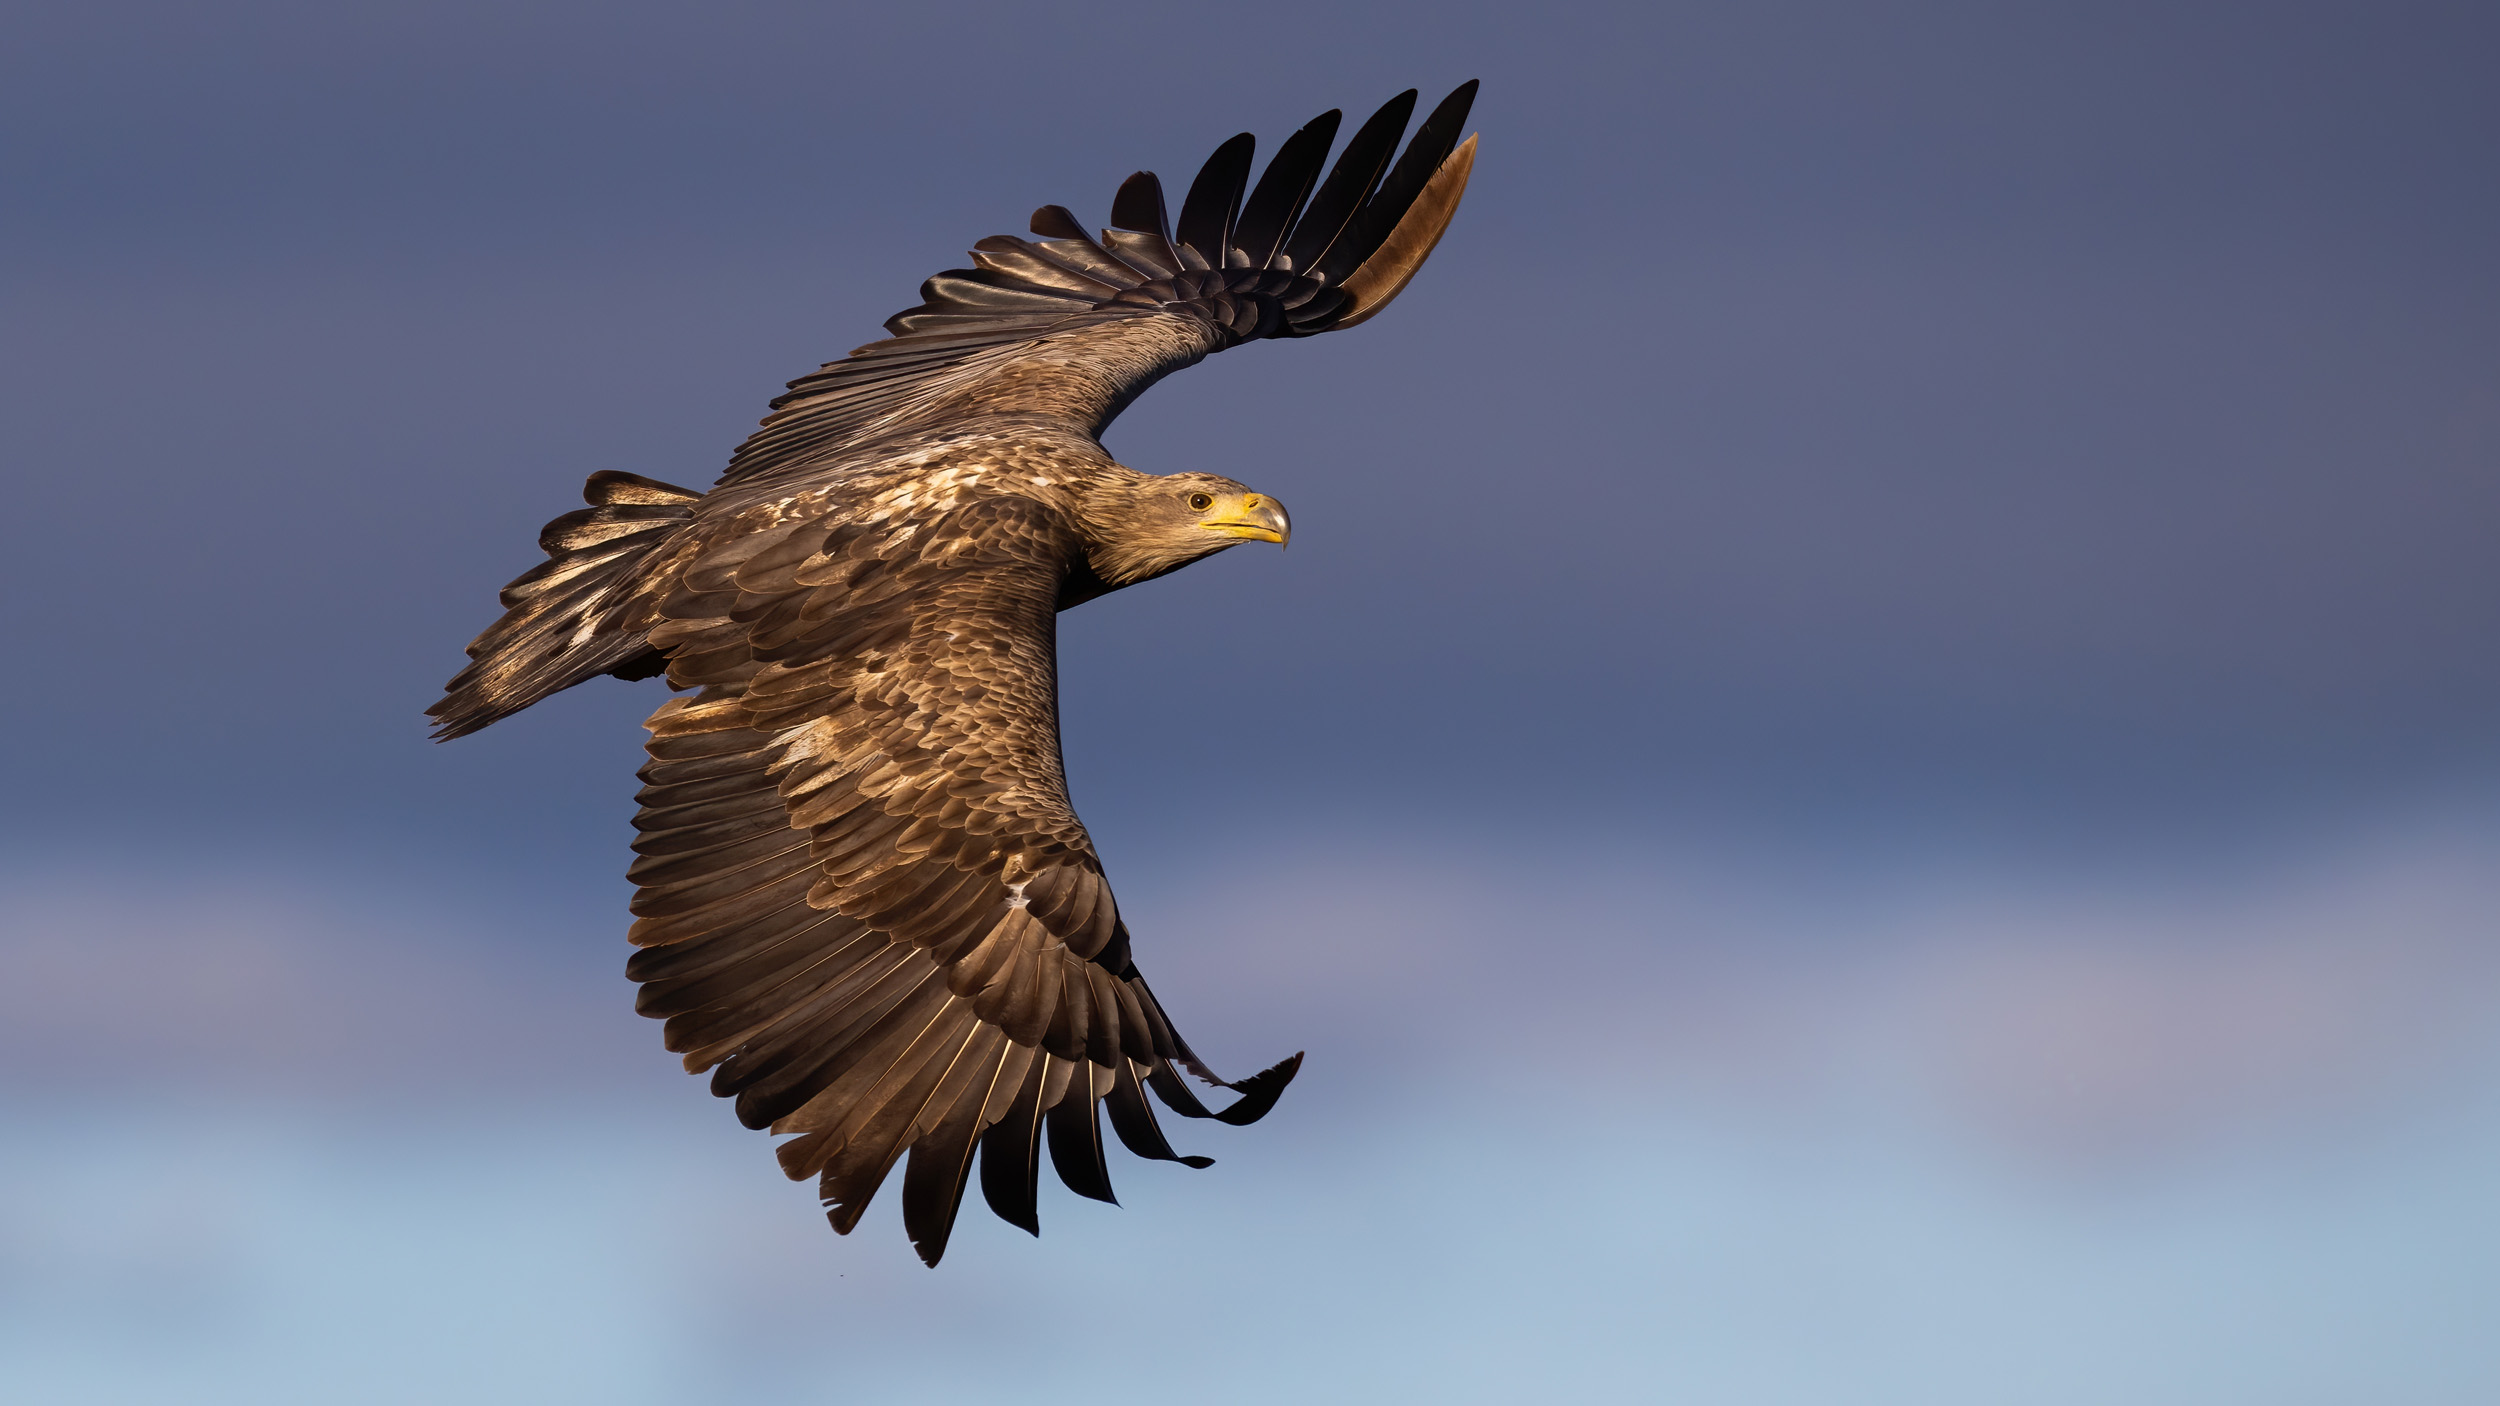 White-tailed Eagle in mid-flight with their wings spread in springtime in sunlight.